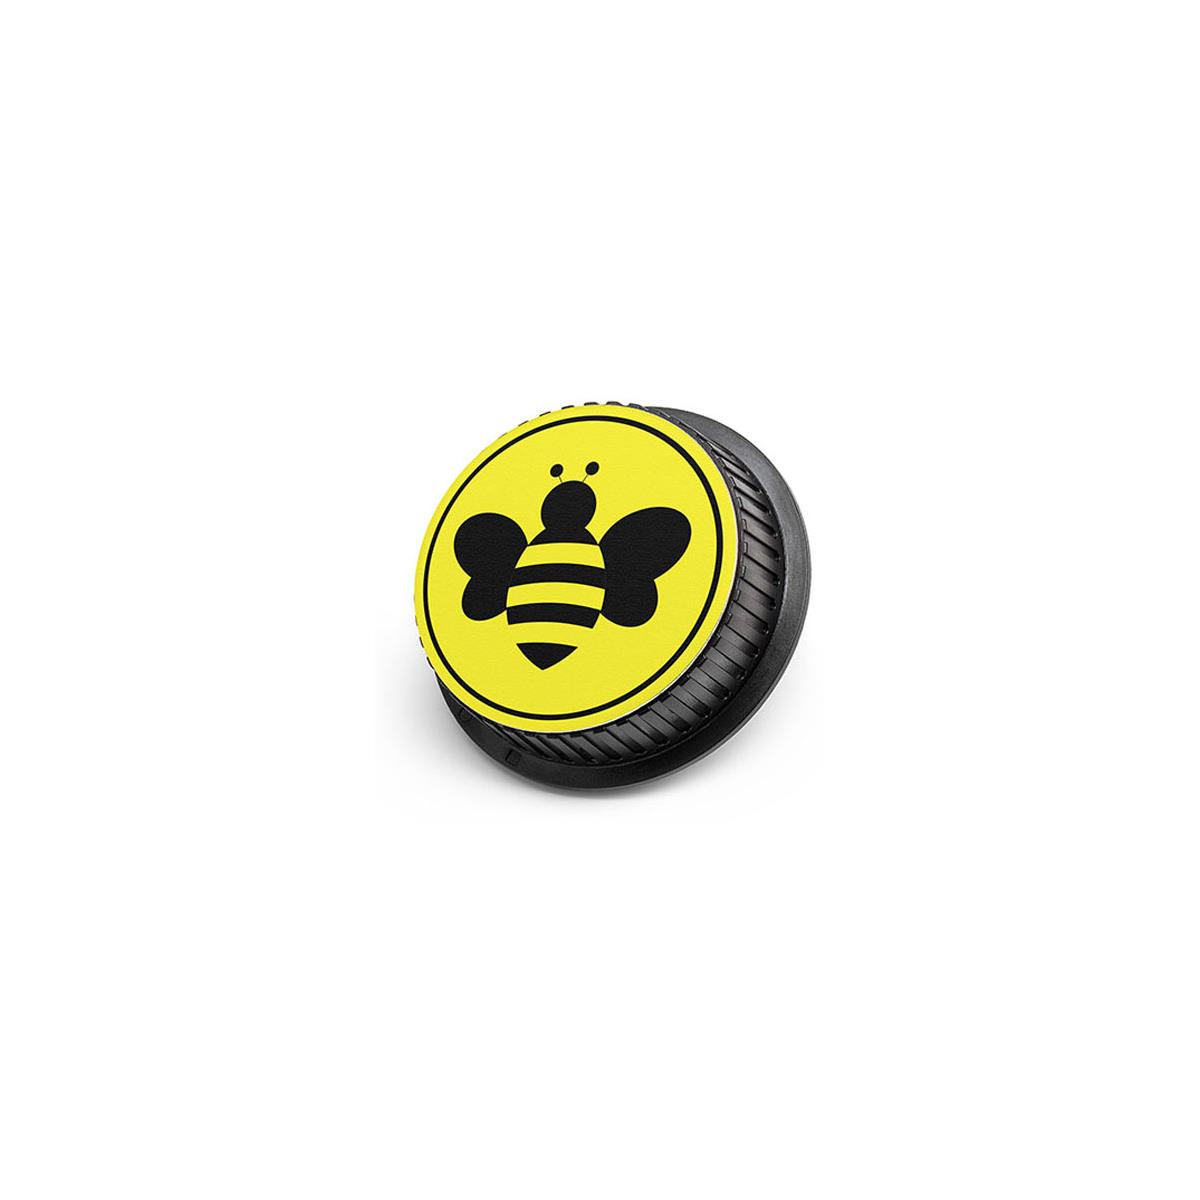 

LenzBuddy Rear Lens Cap for Canon - with Bumble Bee Icon (Yellow)